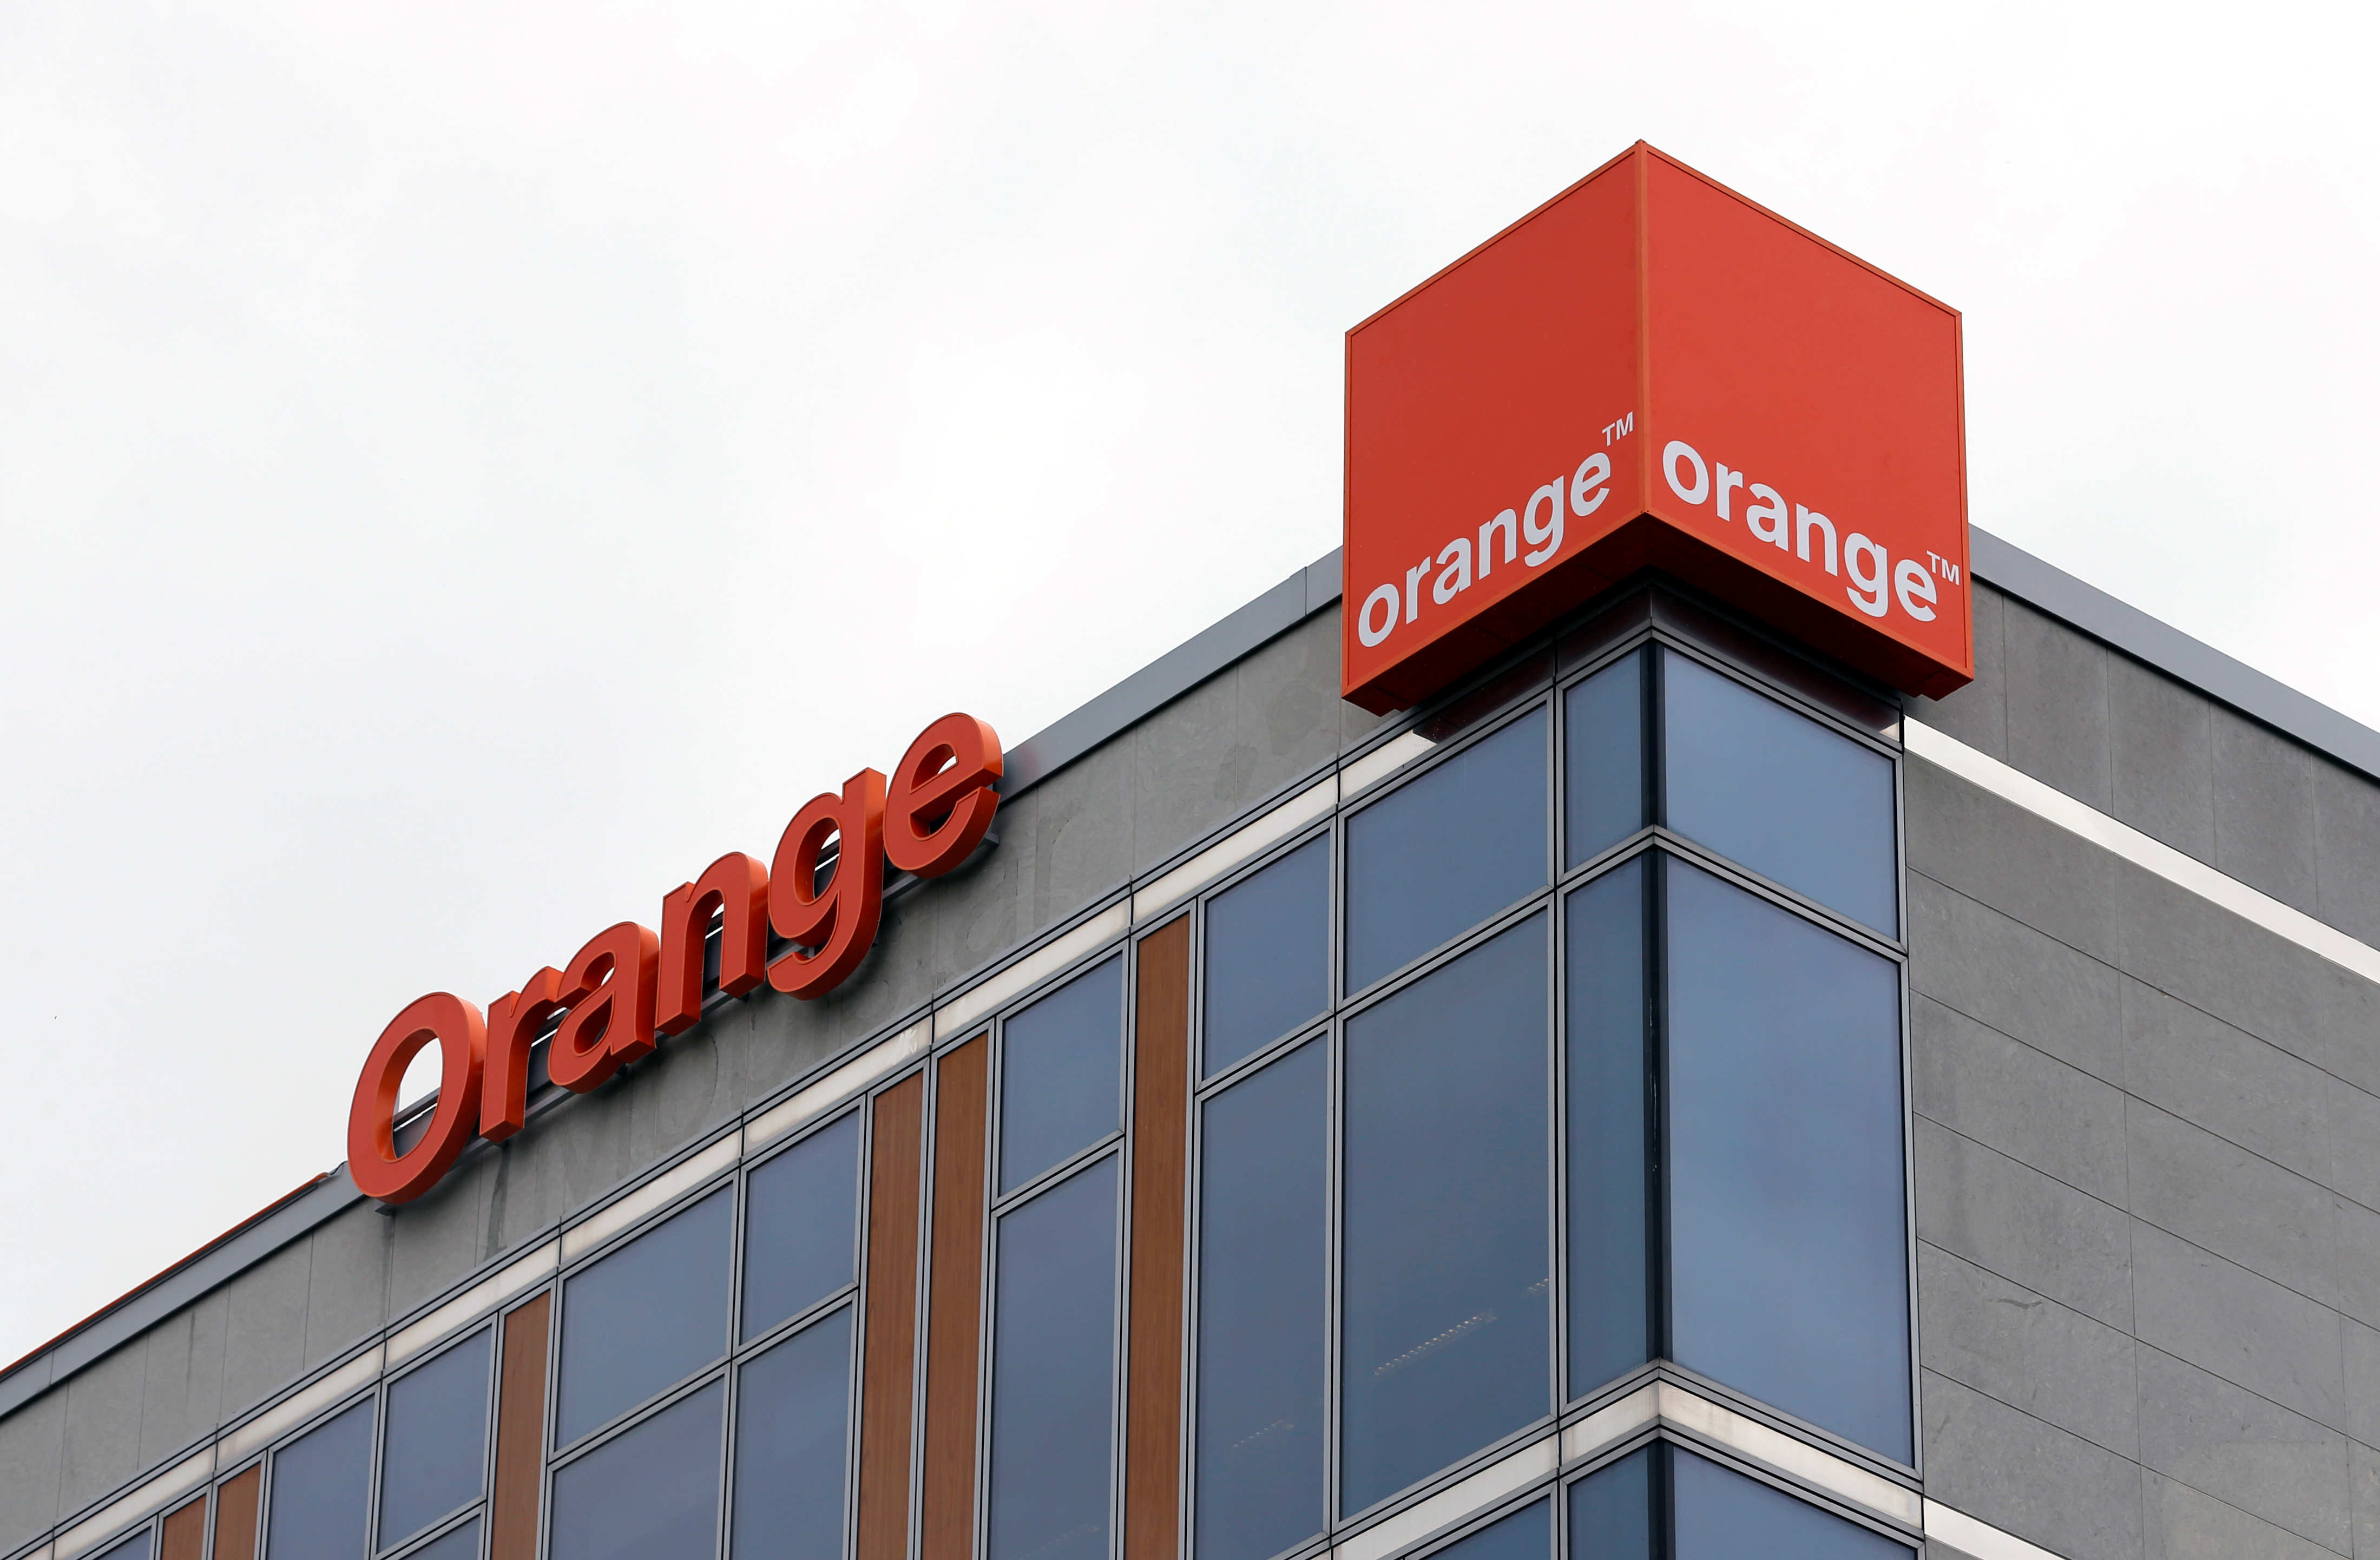 The logo of French telecom operator Orange is pictured on the facade of the Belgian unit in Brussels, Belgium, May 10, 2016.REUTERS/Francois Lenoir